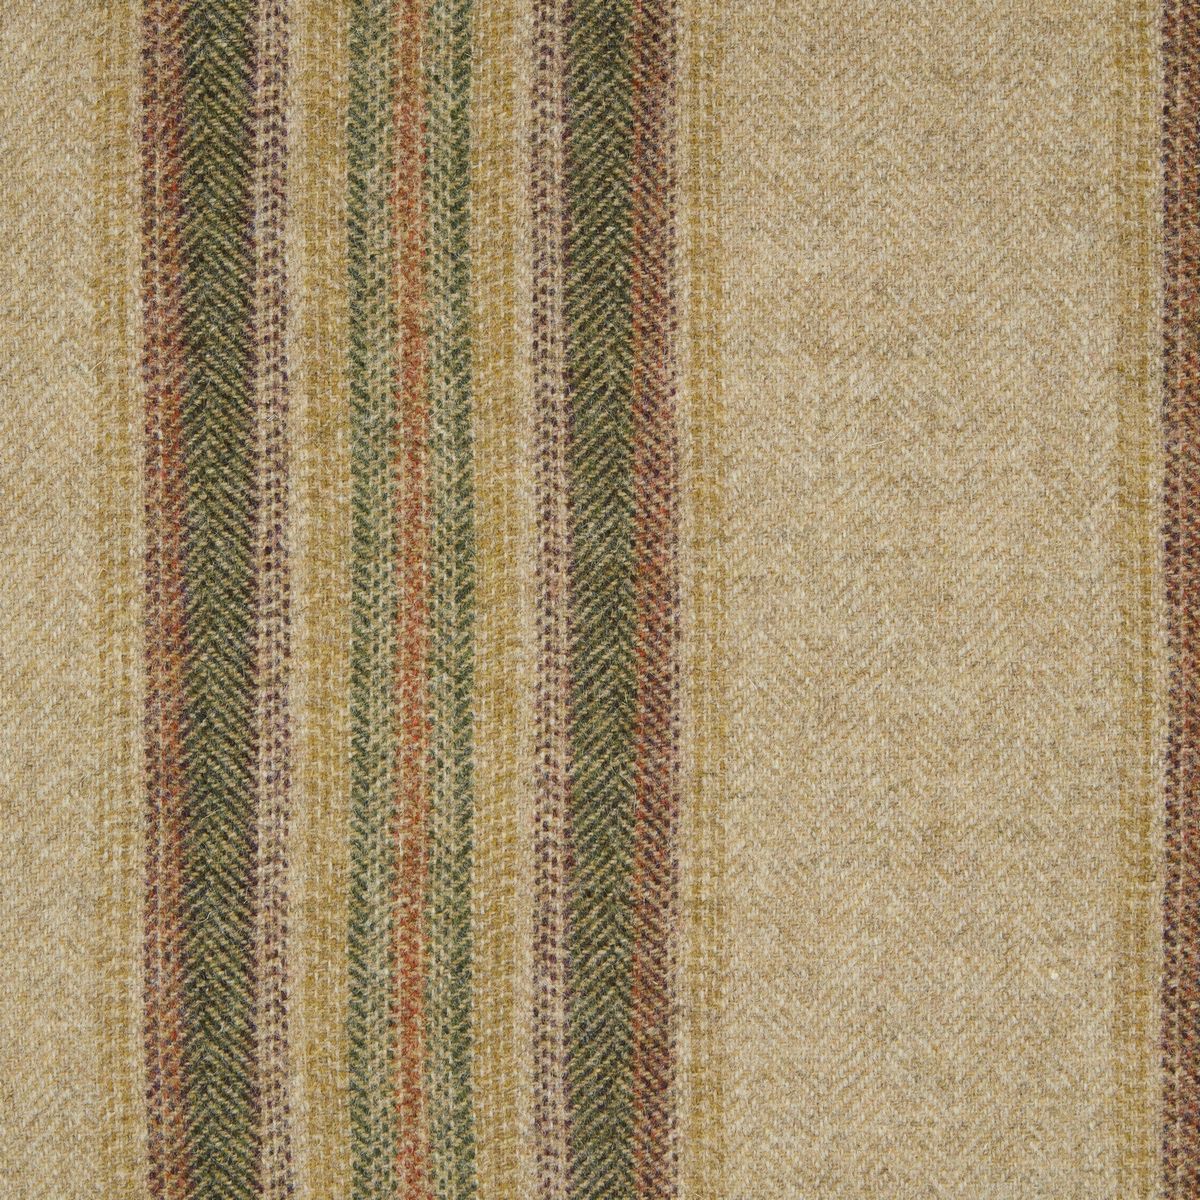 Wentworth Stripe Natural Olive Fabric by Abraham Moon